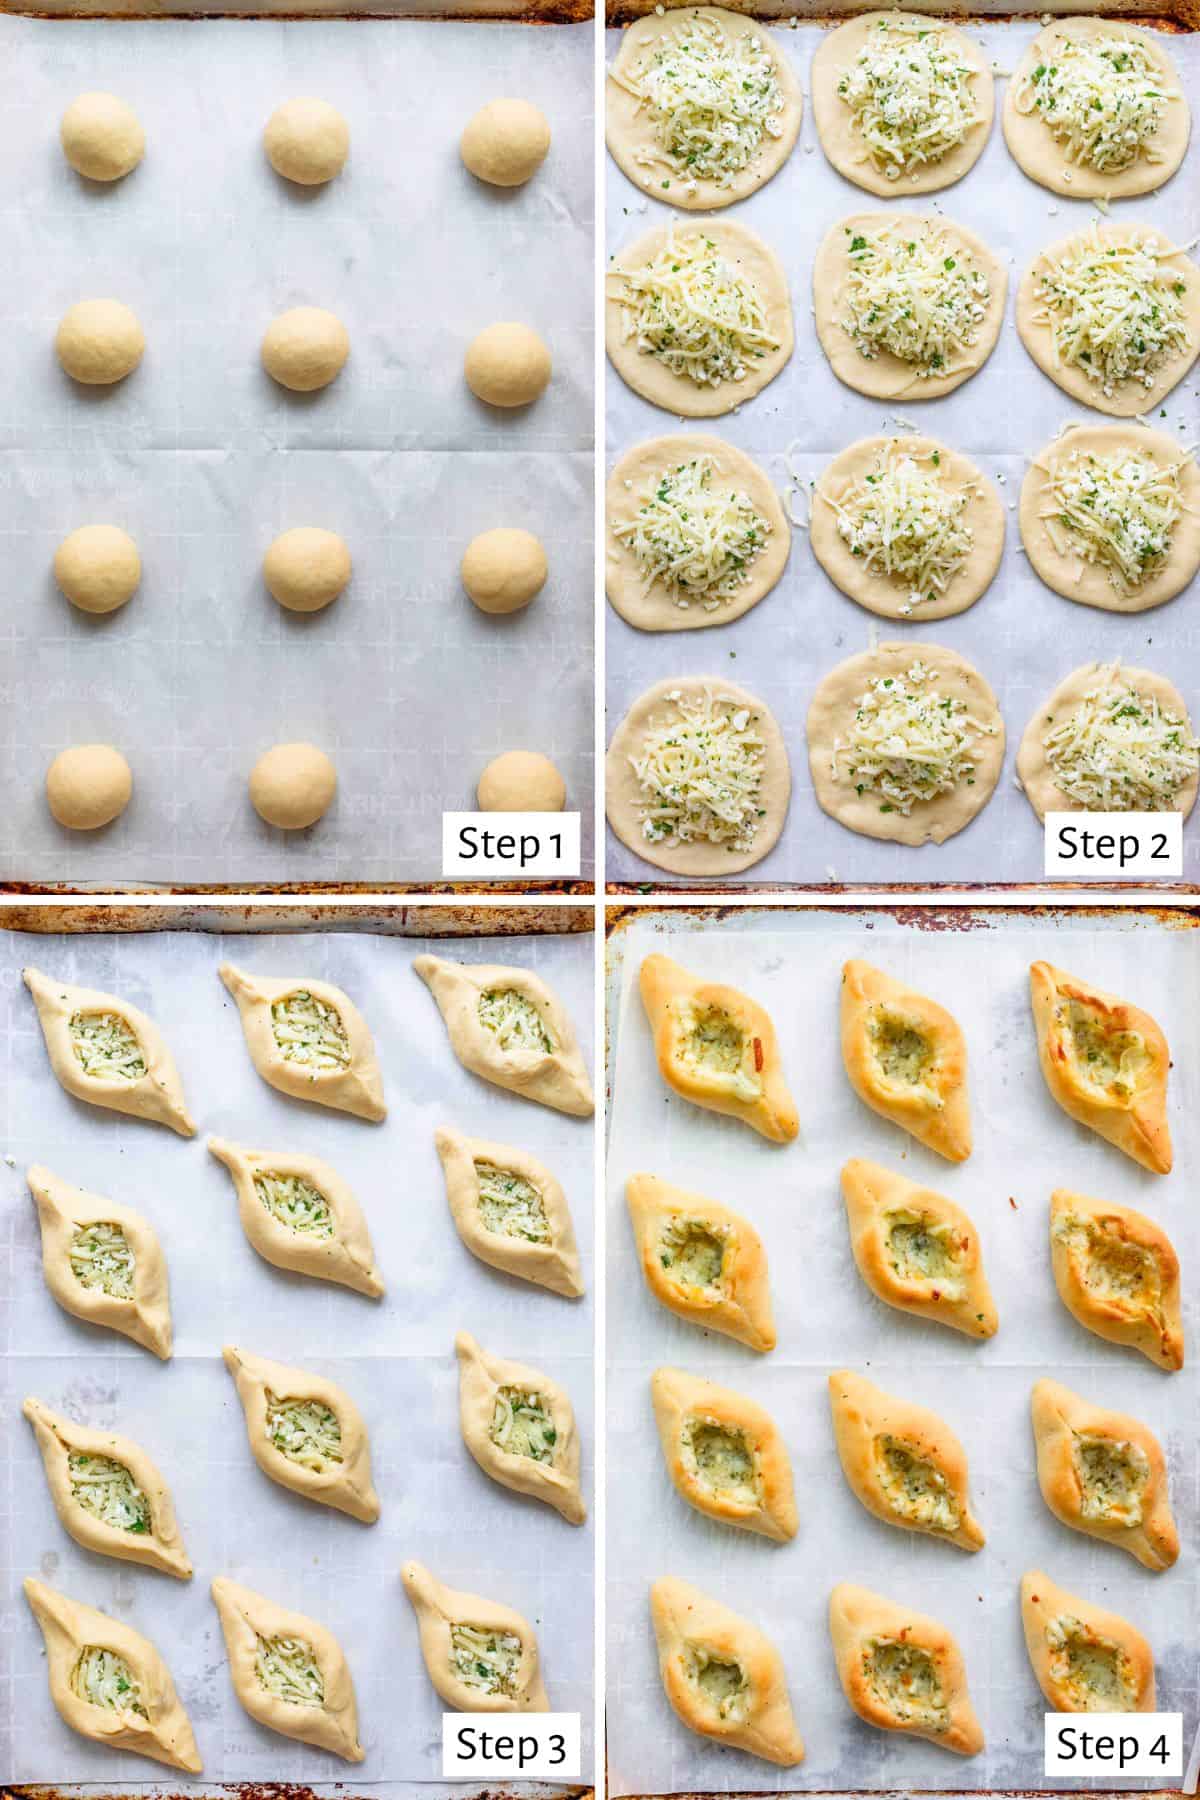 4 image collage making recipe: 1-dough formed into balls, 2- dough balls pressed into round and filled with filling, 3-dough shaped around filling before baking, 4- after baking.